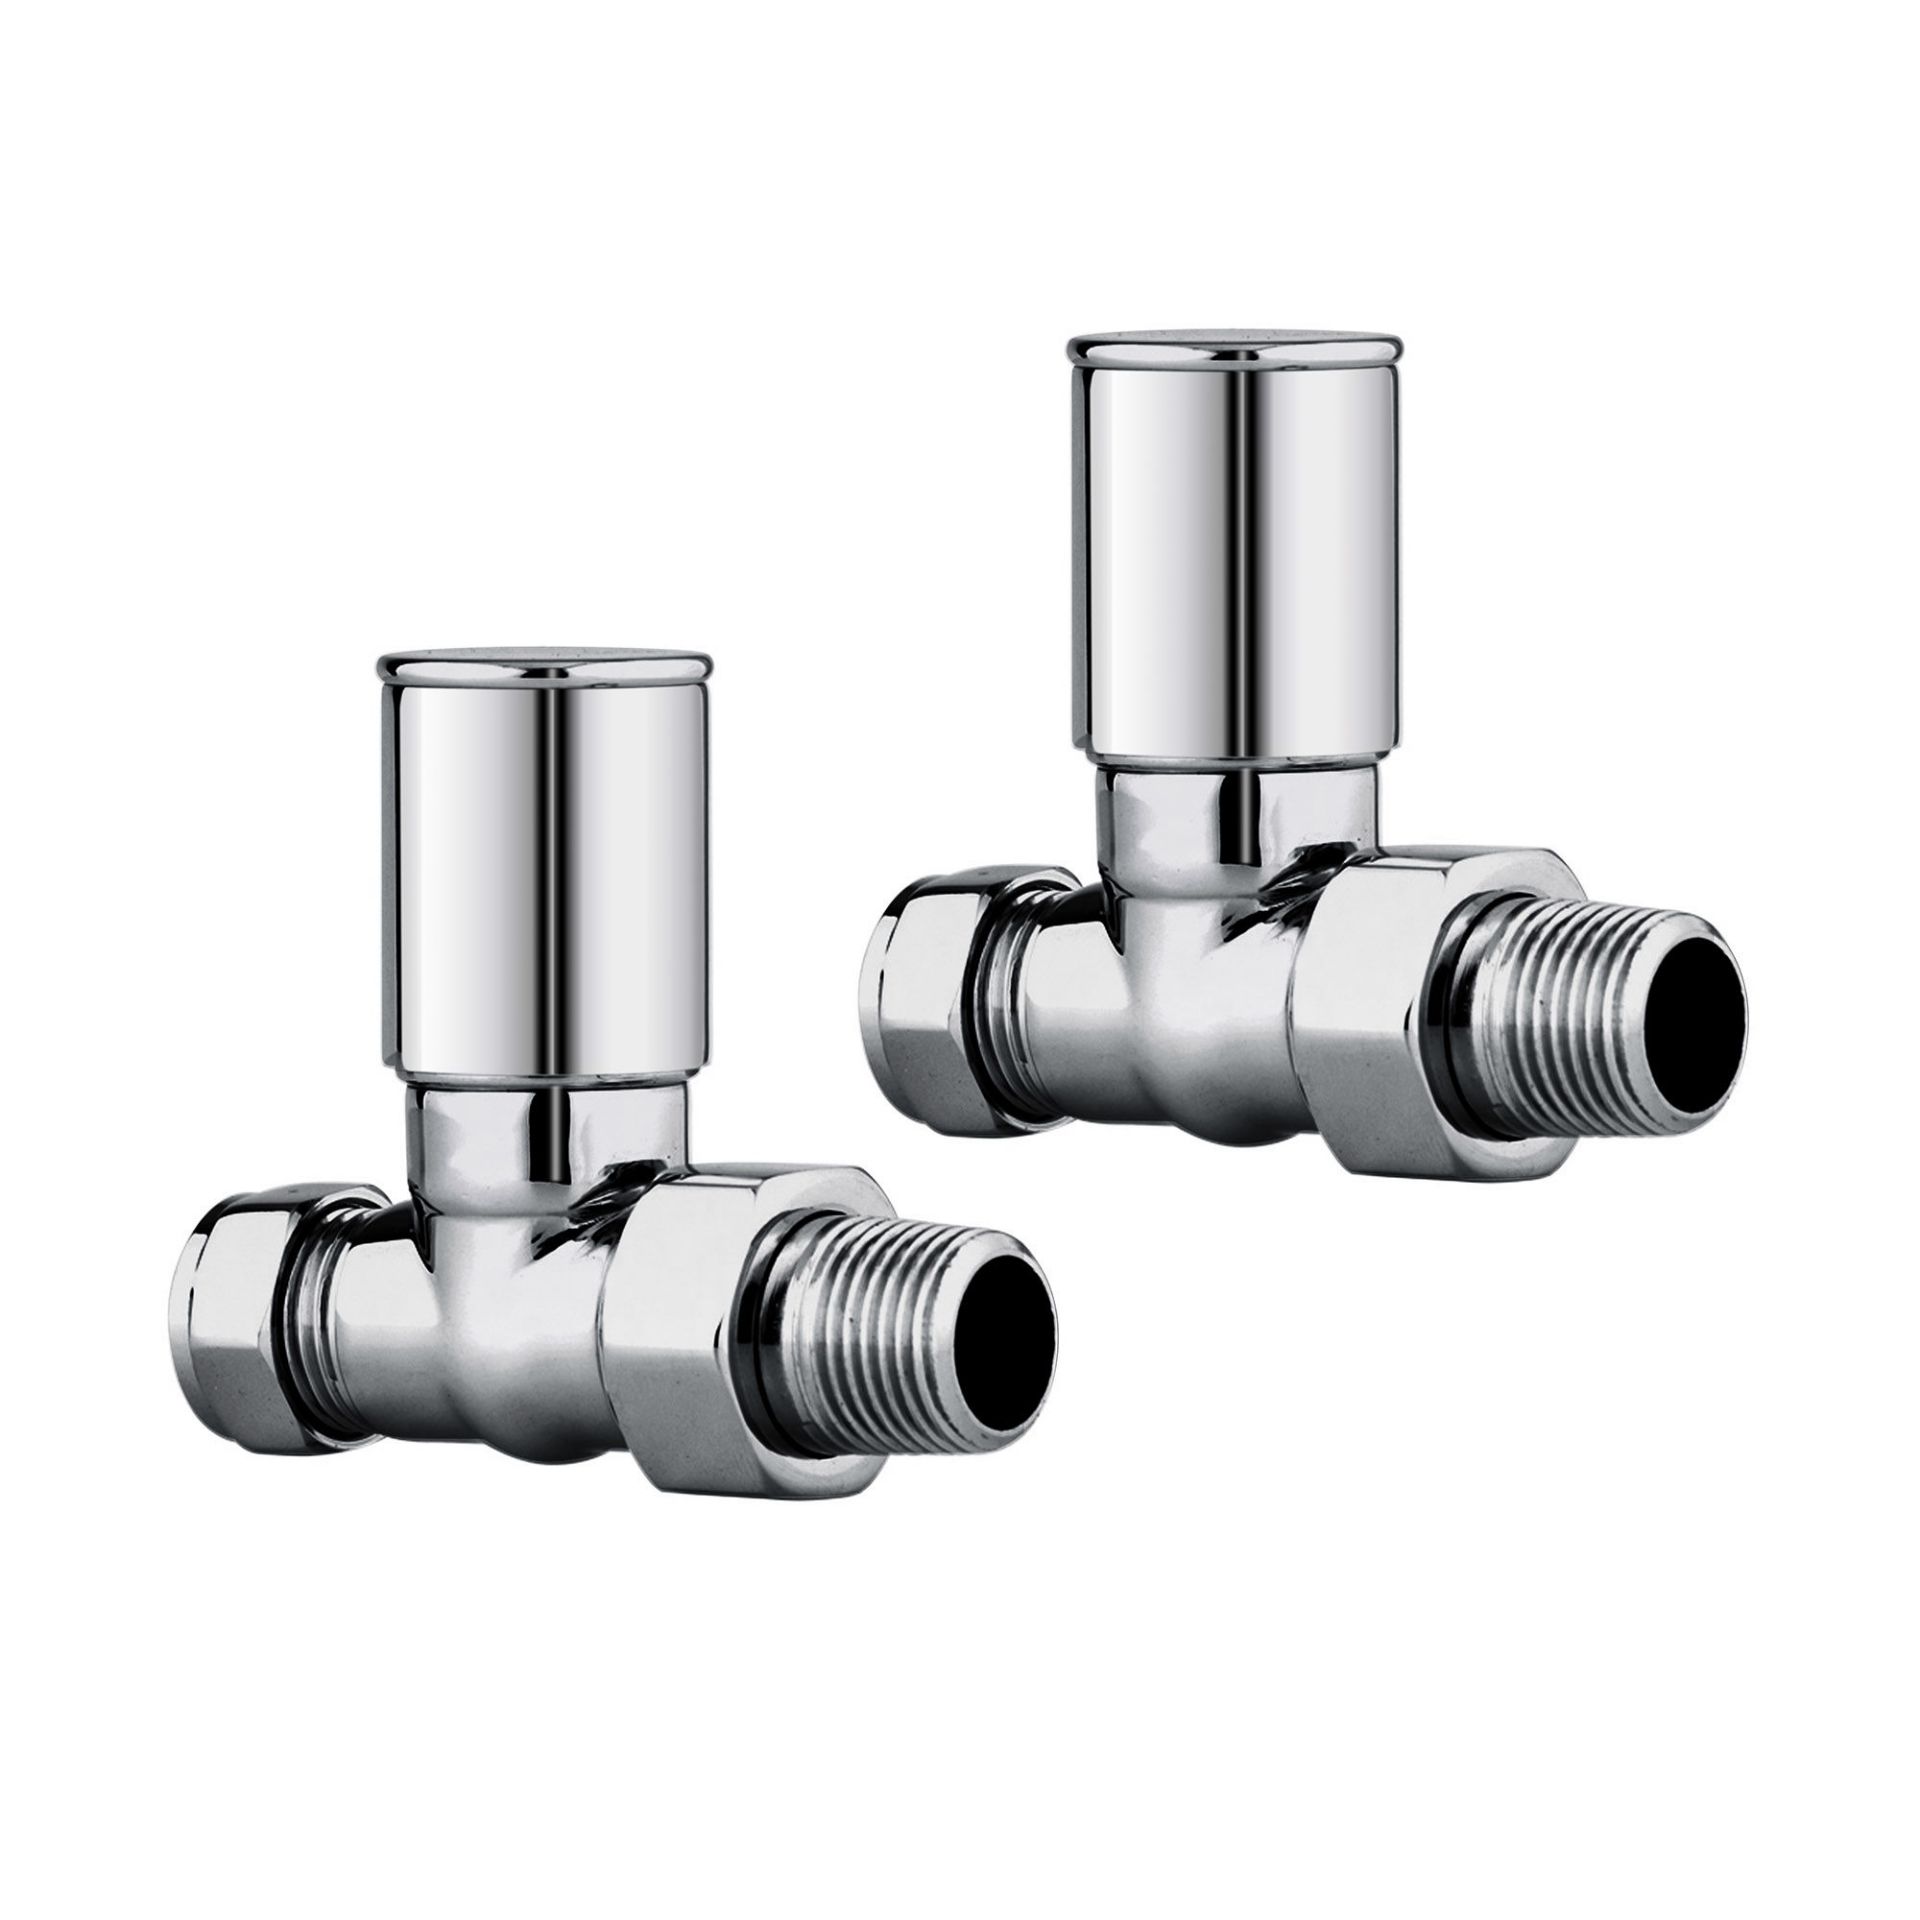 (E1004) 15mm Standard Connection Straight Radiator Valves - Heavy Duty Polished Chrome Plated B... - Image 2 of 2